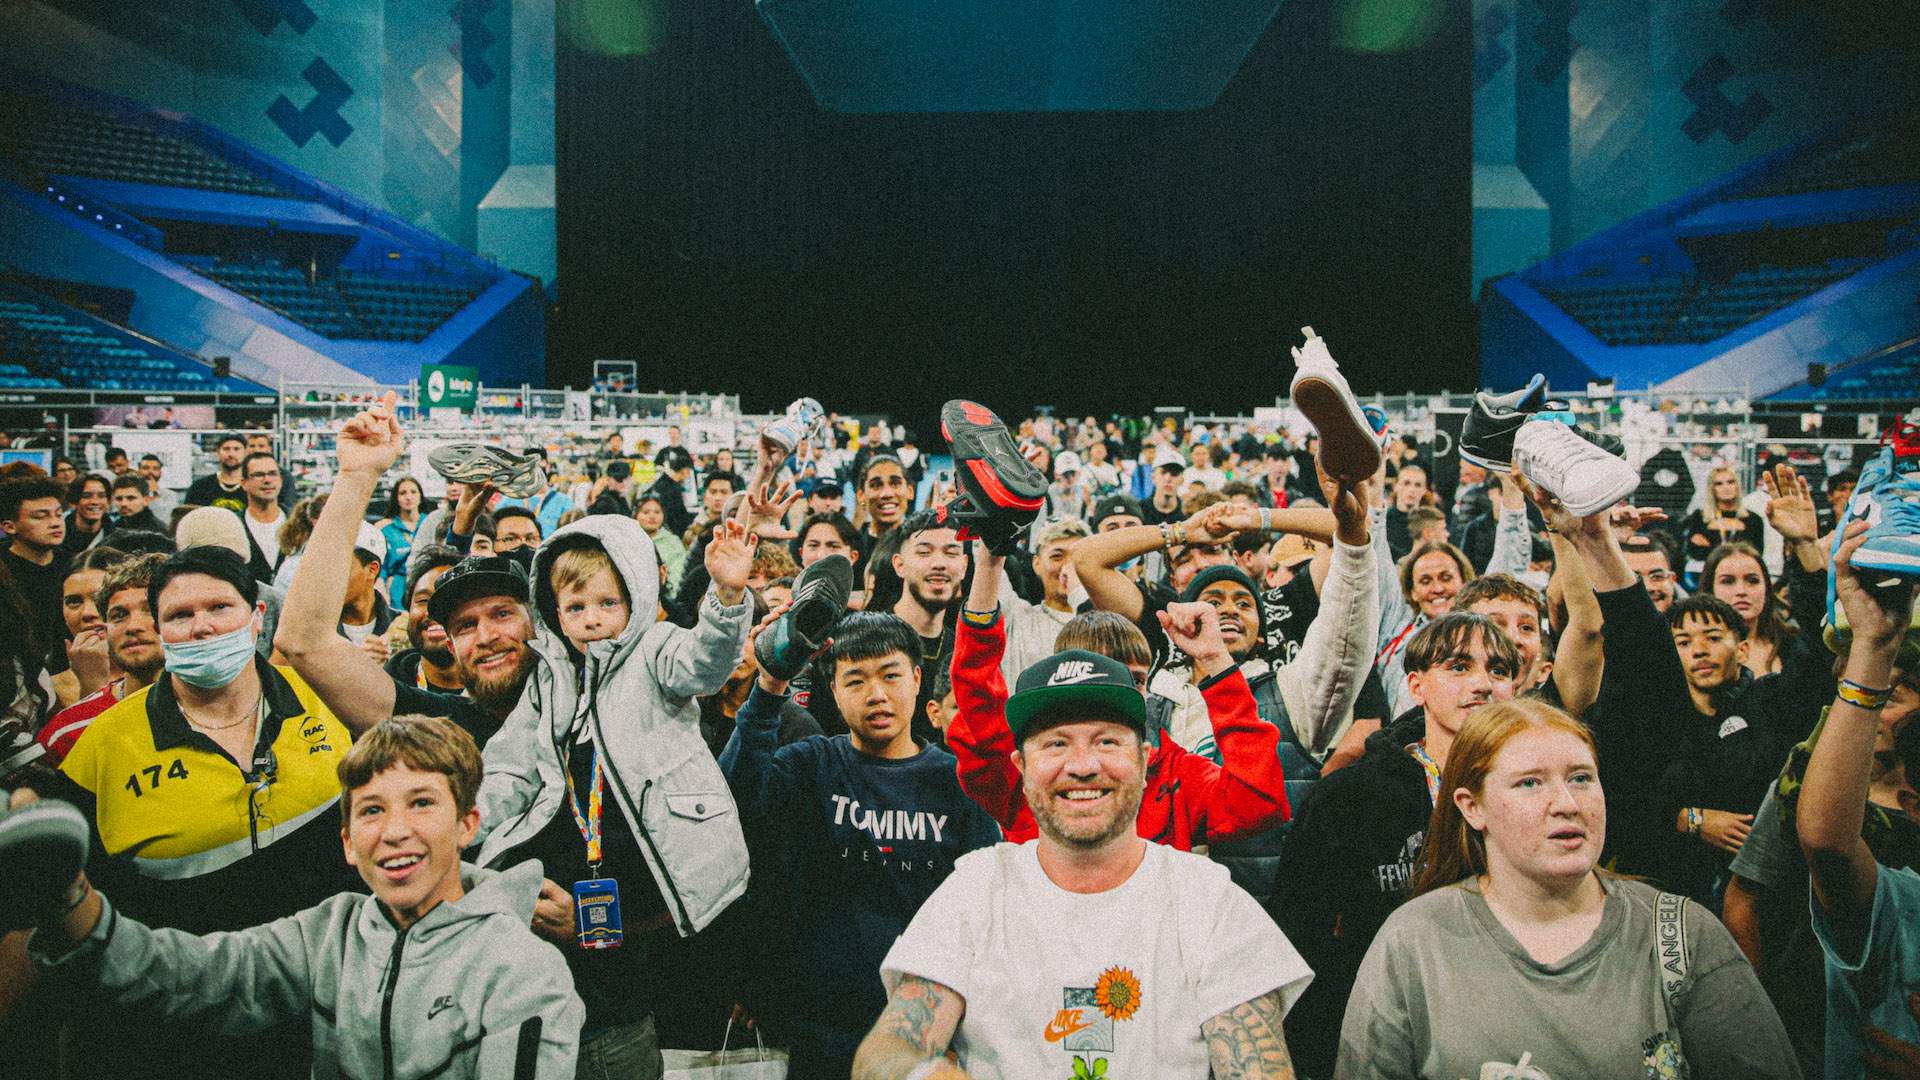 Australia's largest sneaker convention, Sneakerland